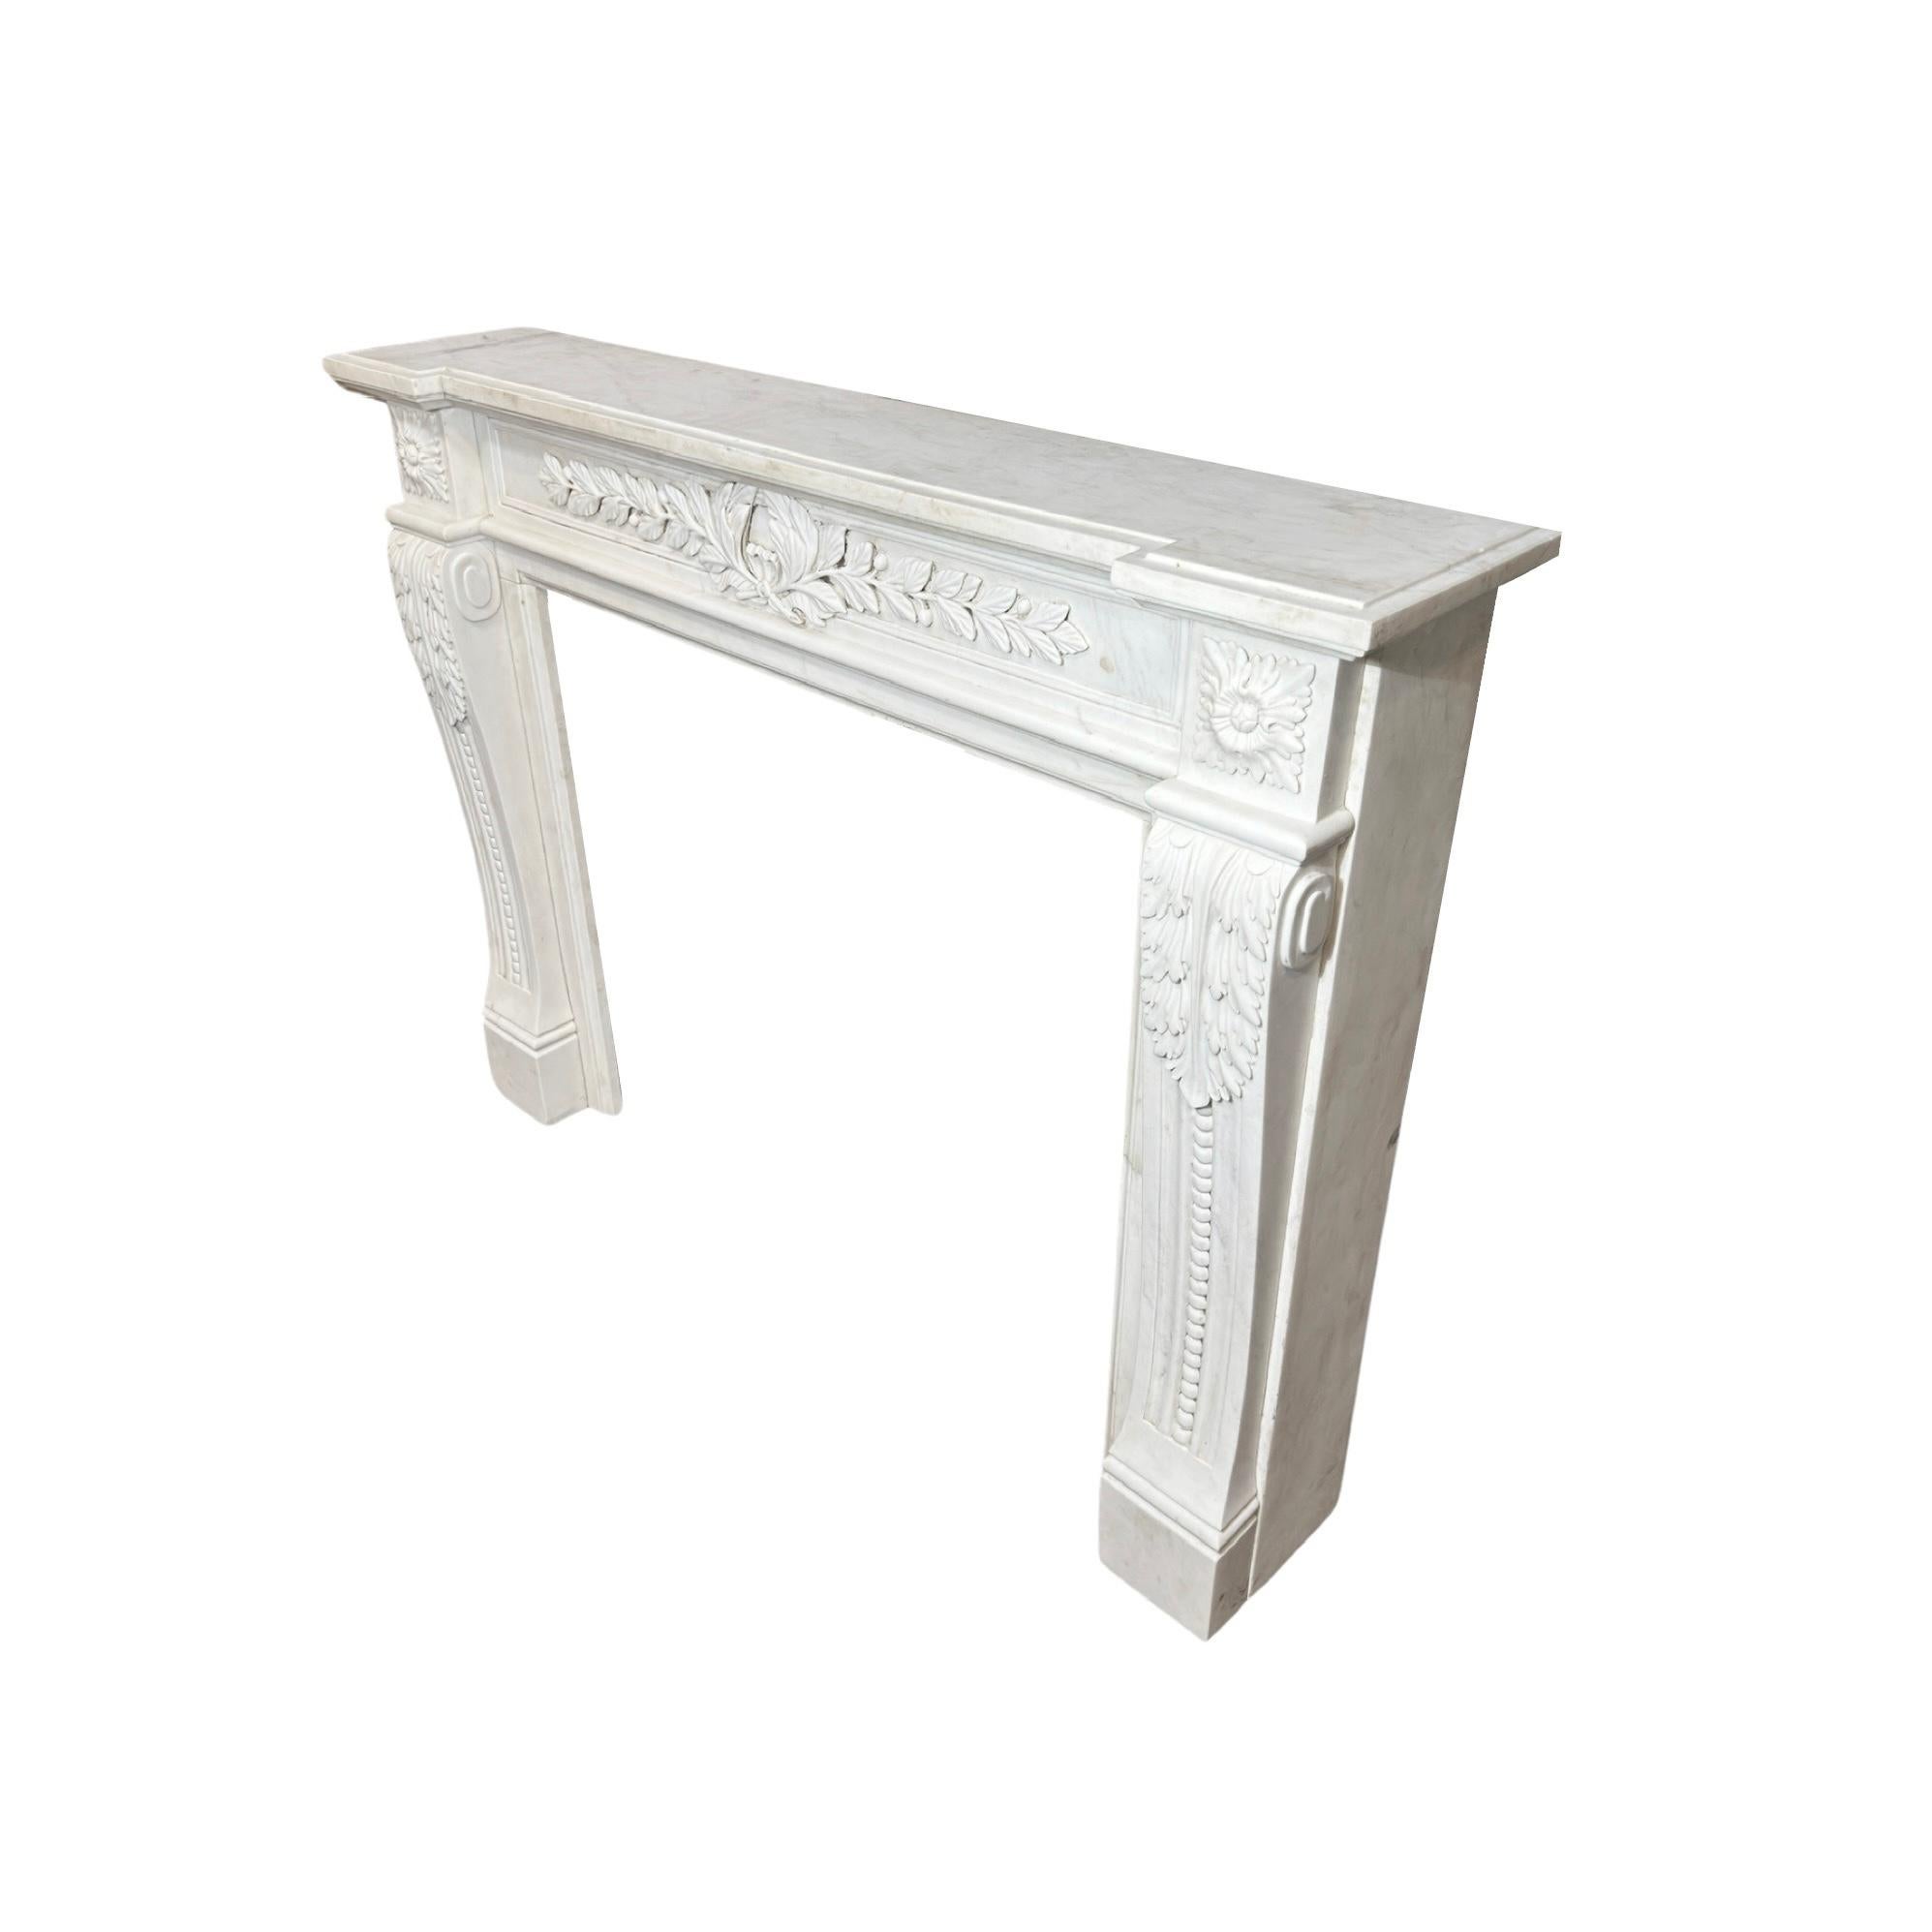 18th Century French Carrara Marble Mantel For Sale